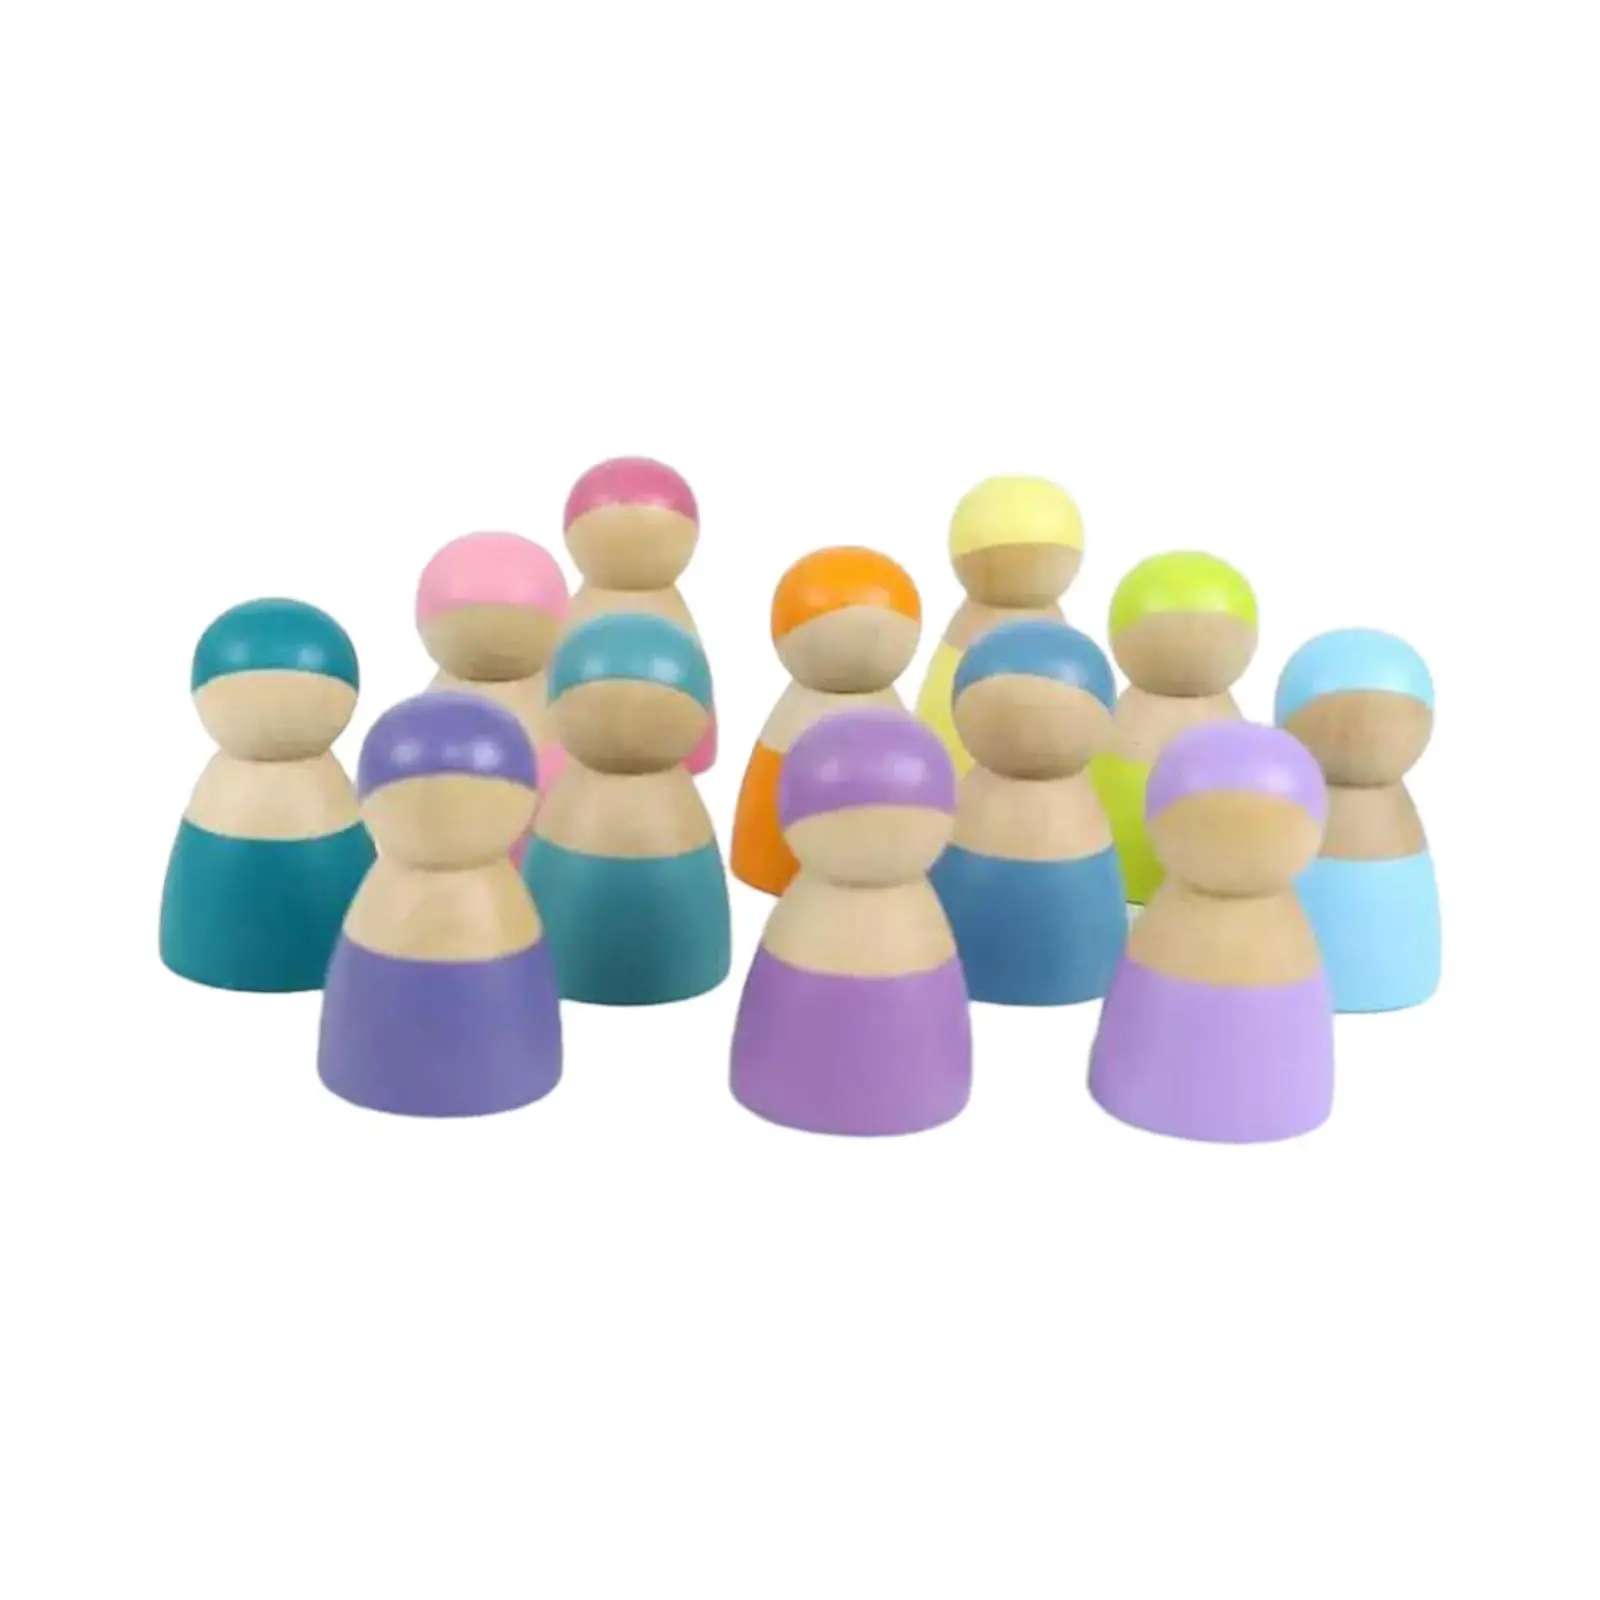 

12x Rainbow Wood Peg Dolls Pretend Play Figures for Table Party House Wardrobes Office Home Decoration Train Tracks Party Favors